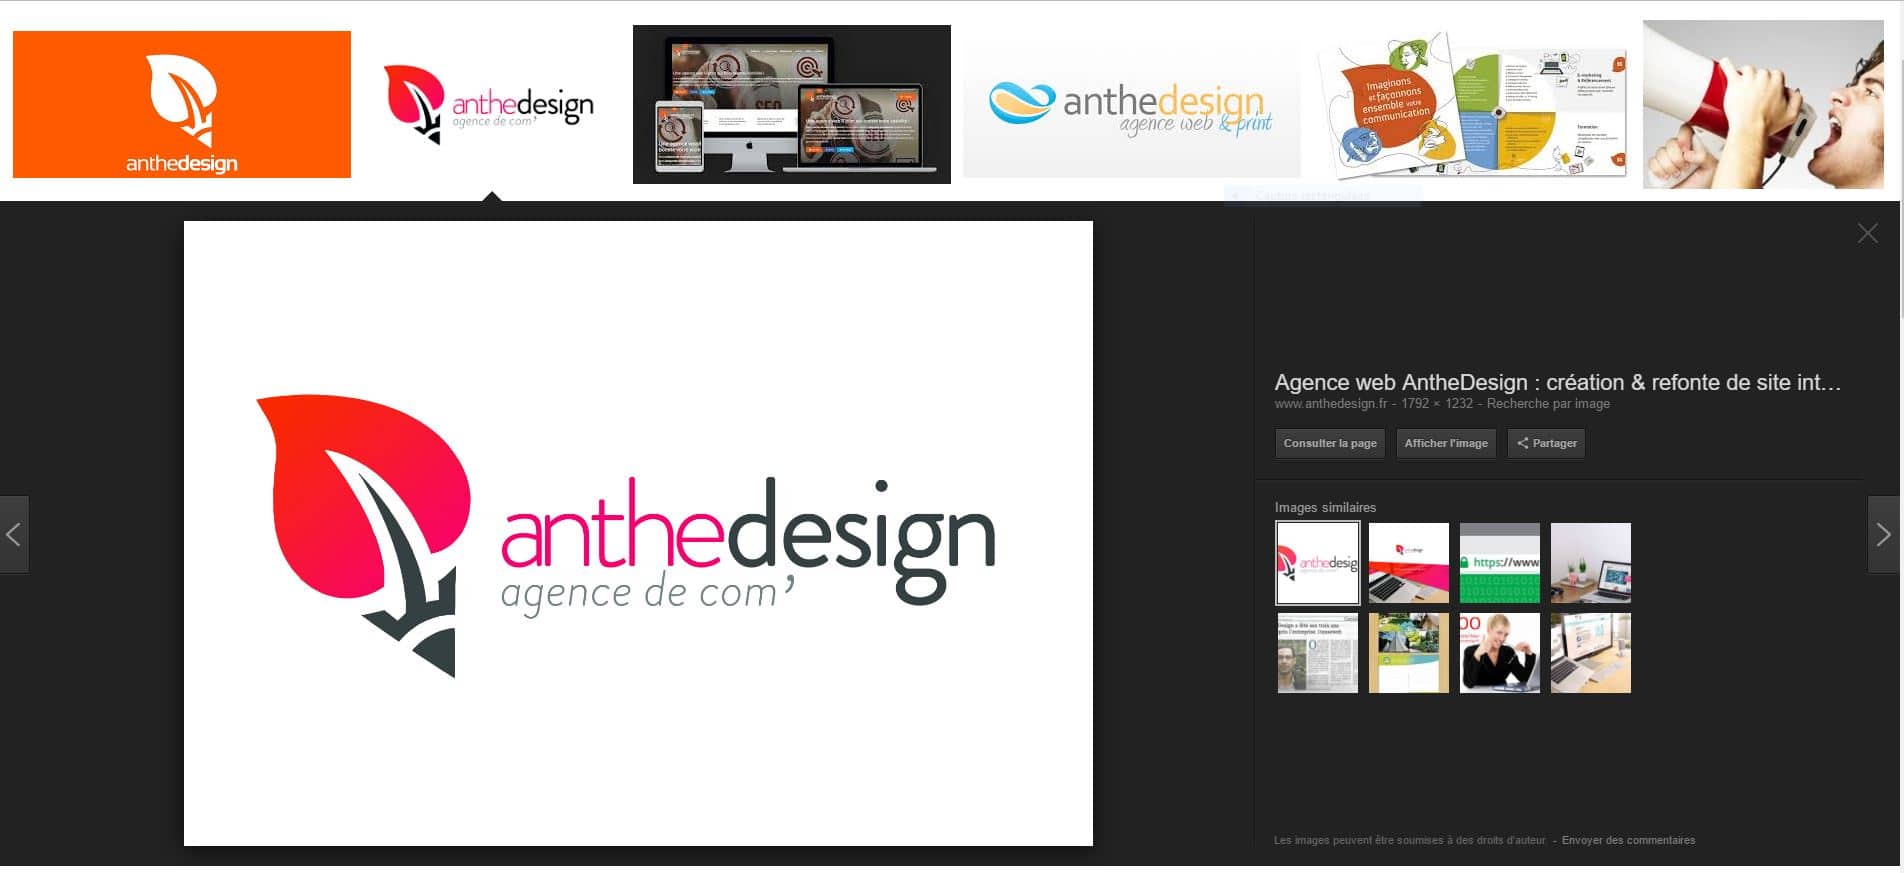 anthedesign google images